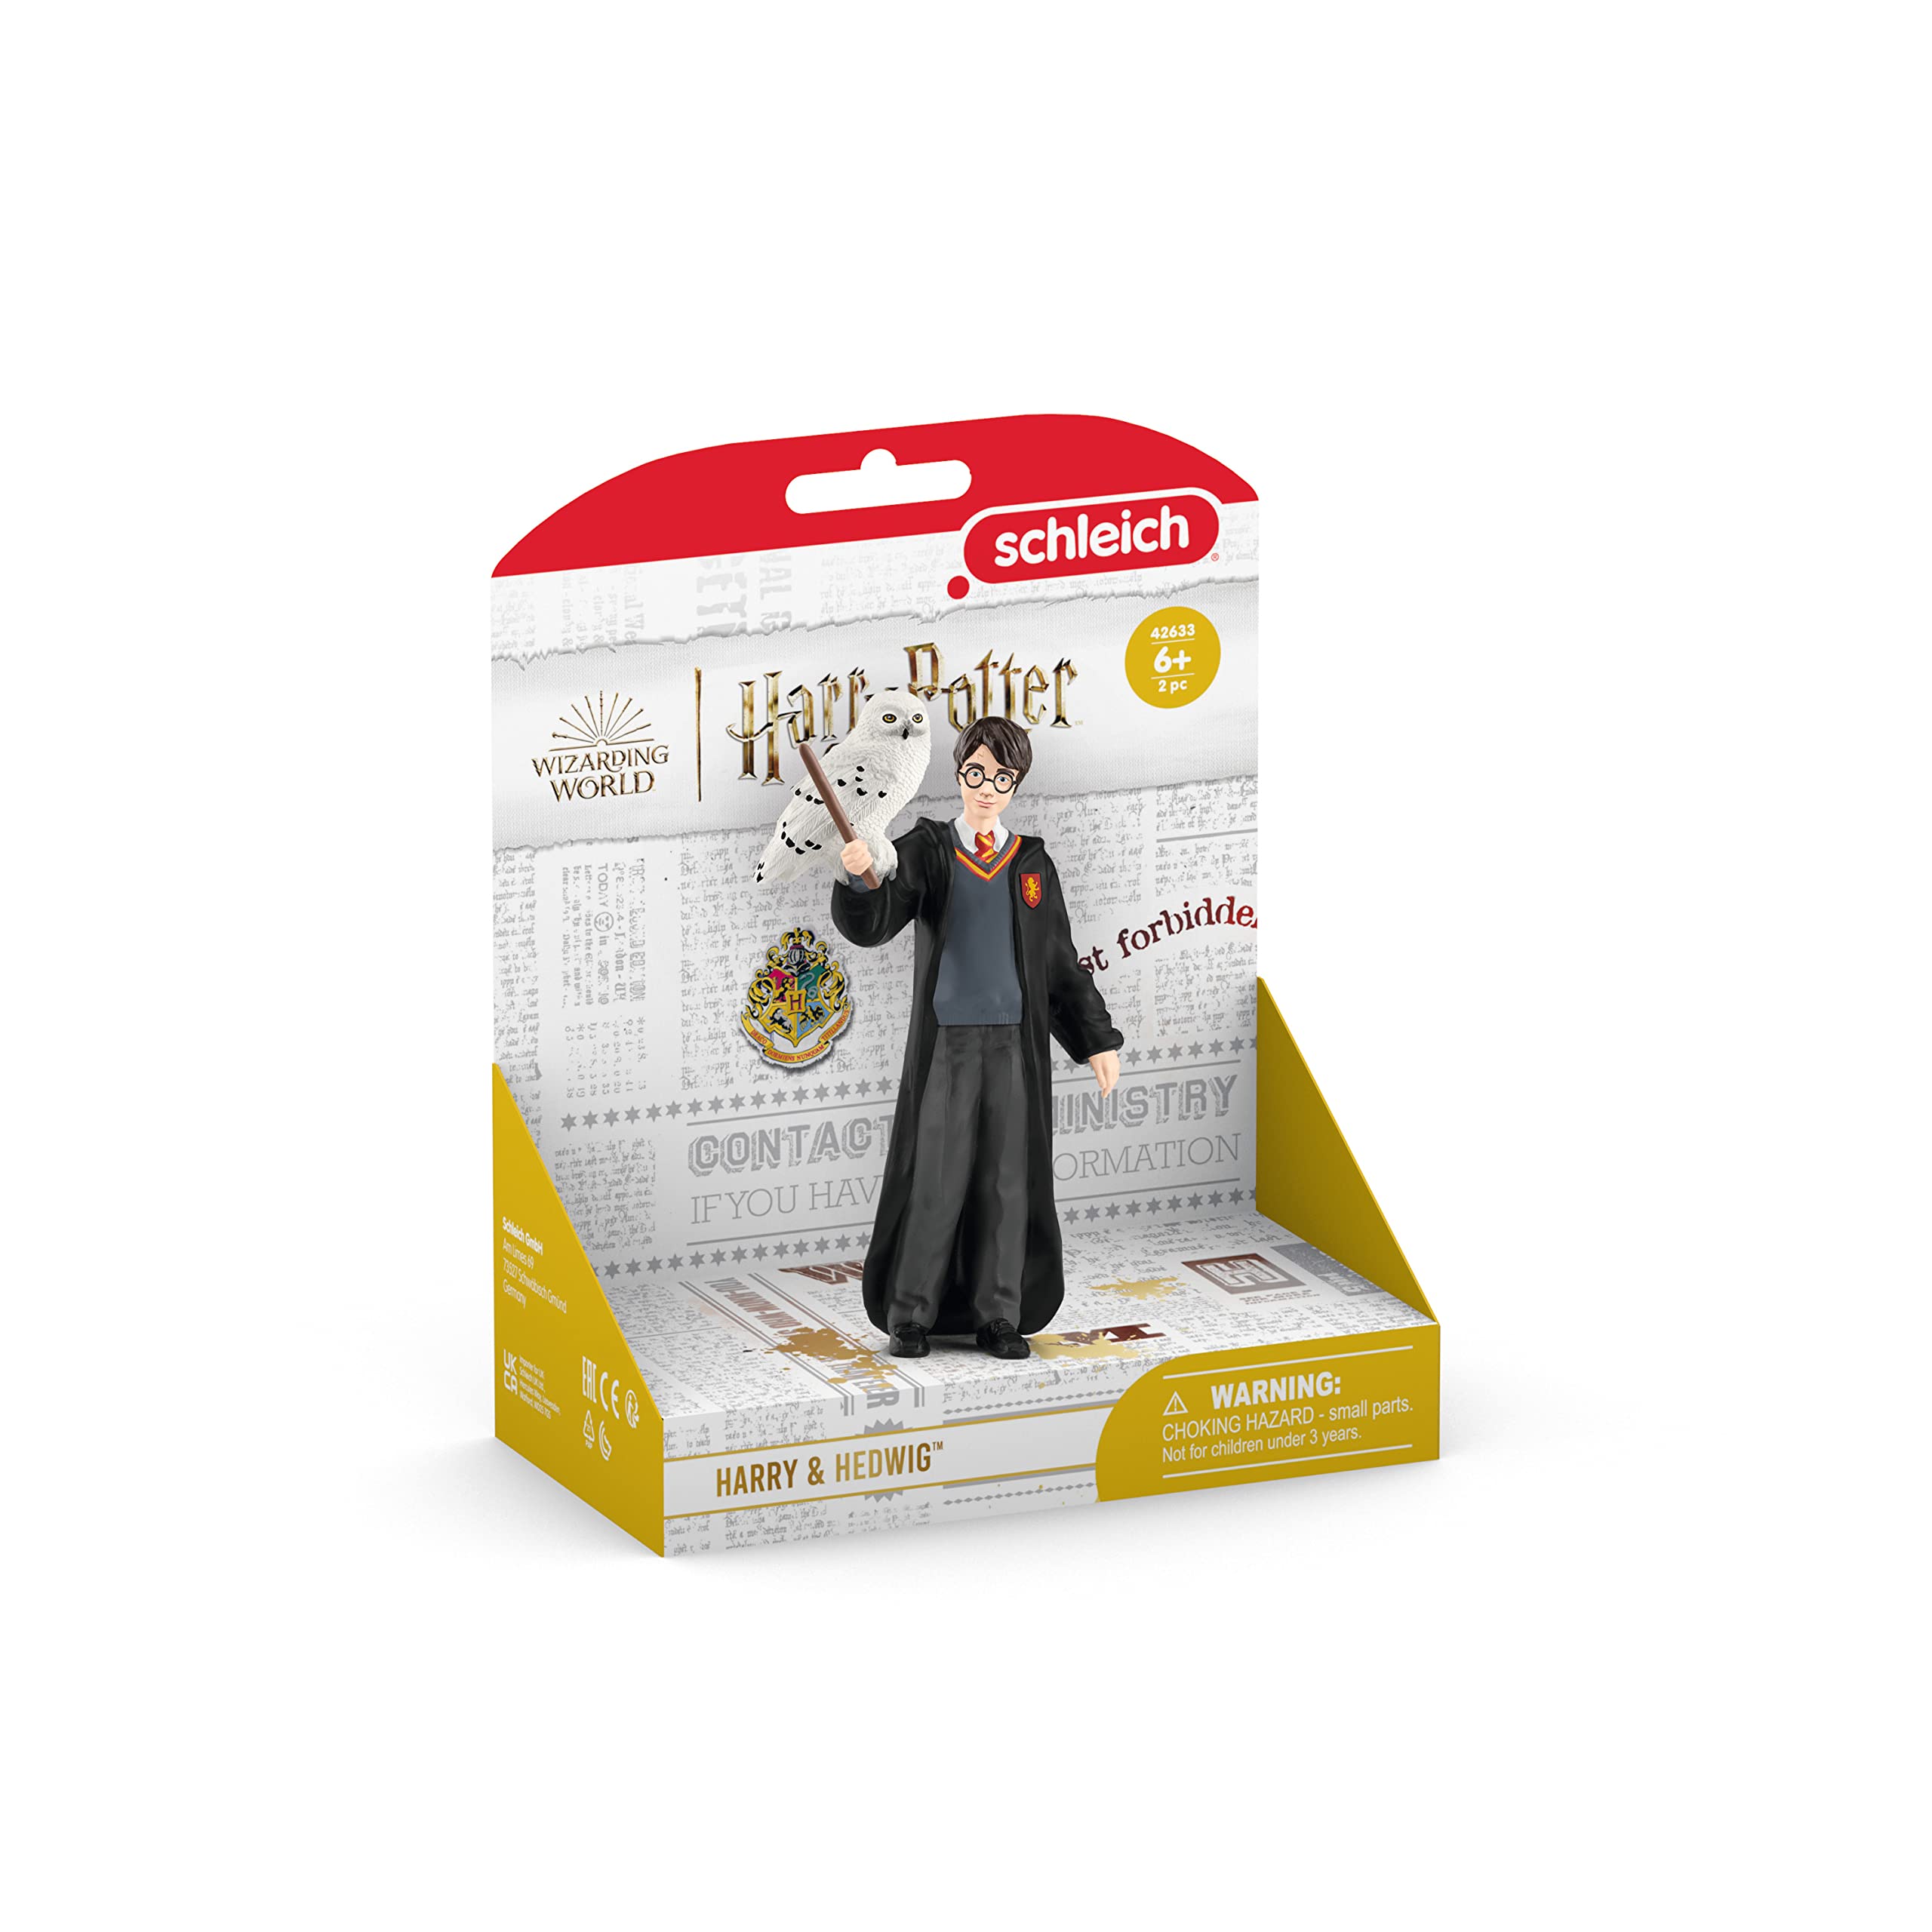 Schleich Wizarding World™ of Harry Potter 2-Piece Set with Harry Potter™ & Hedwig™ Collectible Figurines for Kids Ages 6+